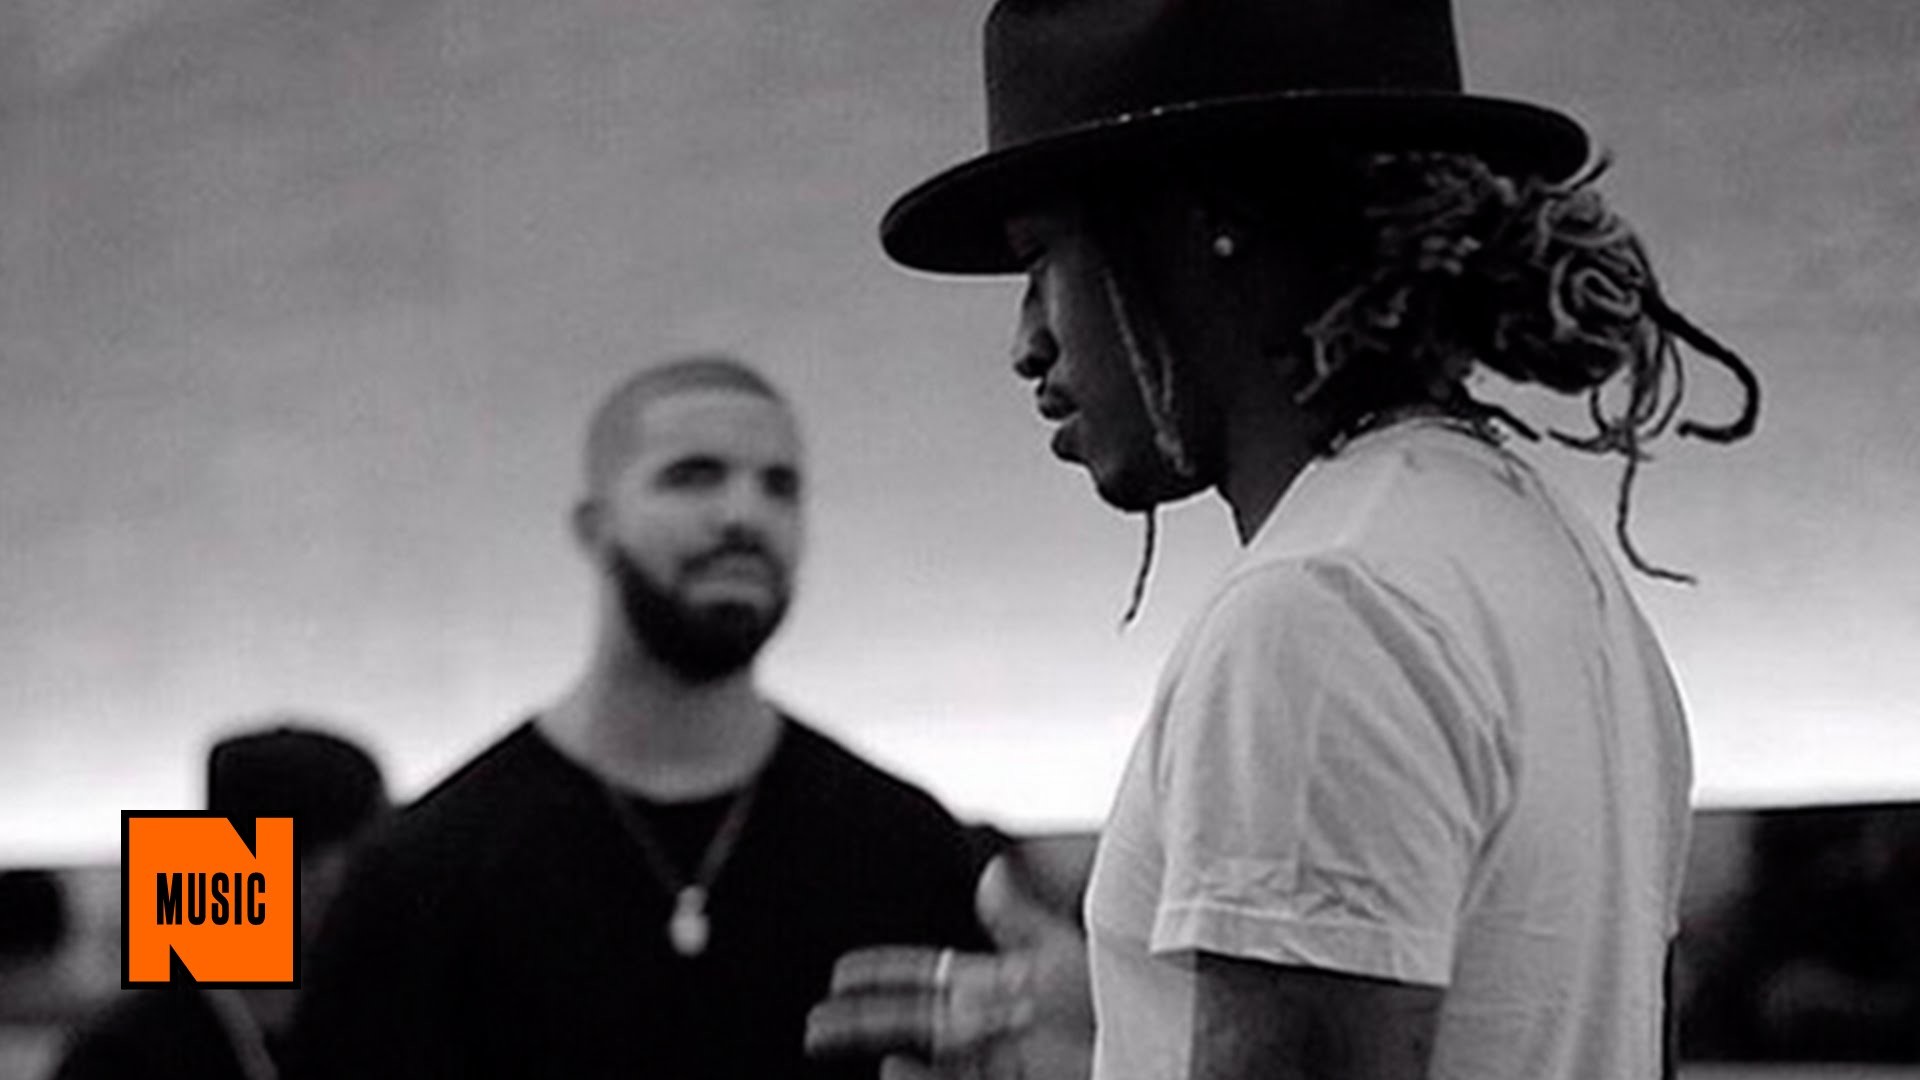 1920x1080 What A Time To Be Alive: Drake and Future ARE Dropping A Mixtape - YouTube